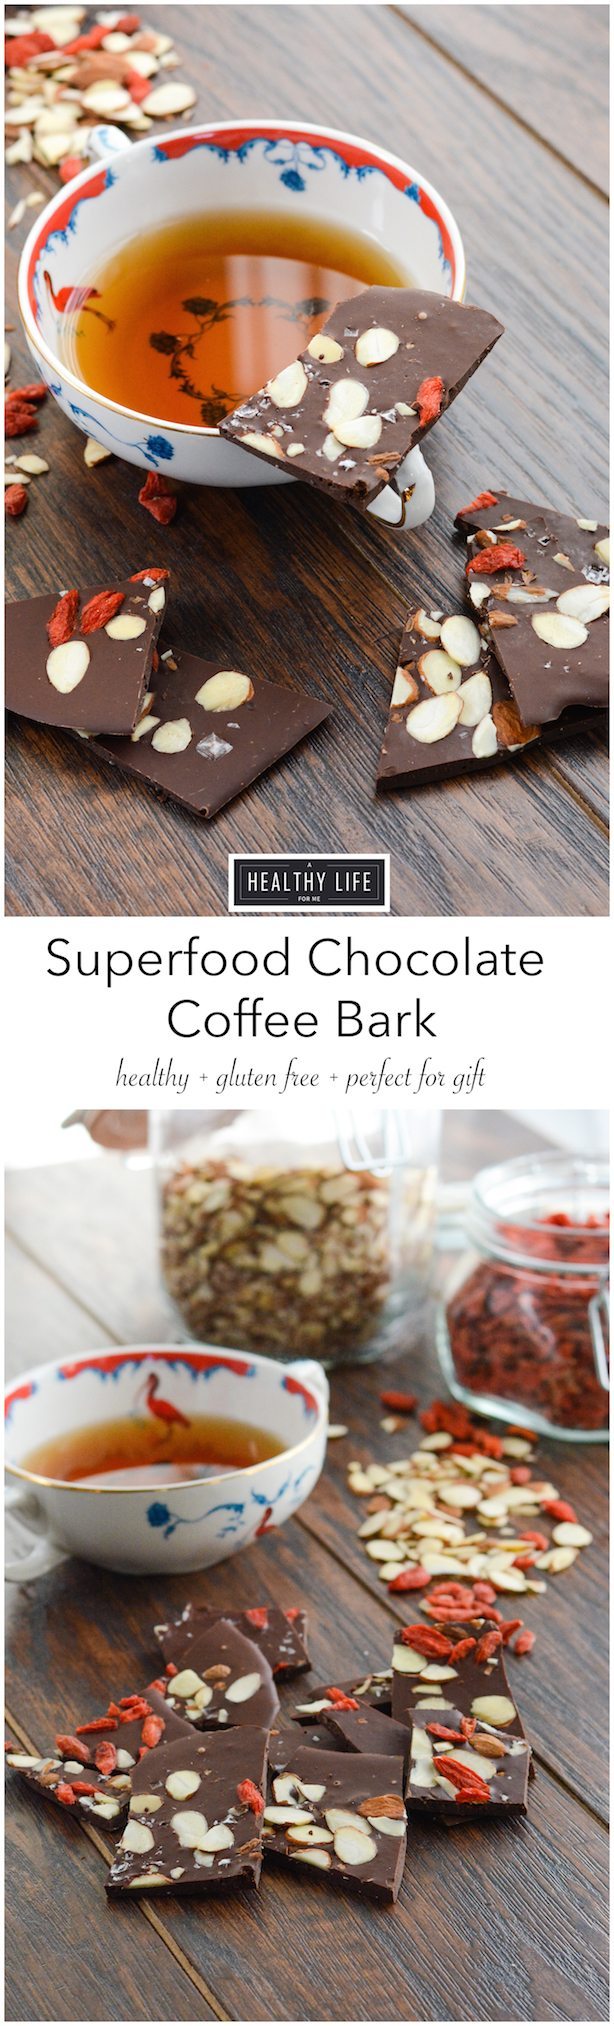 Superfood Chocolate Coffee Bark is gluten free, healthy and decadent recipe | ahealthylifeforme.com